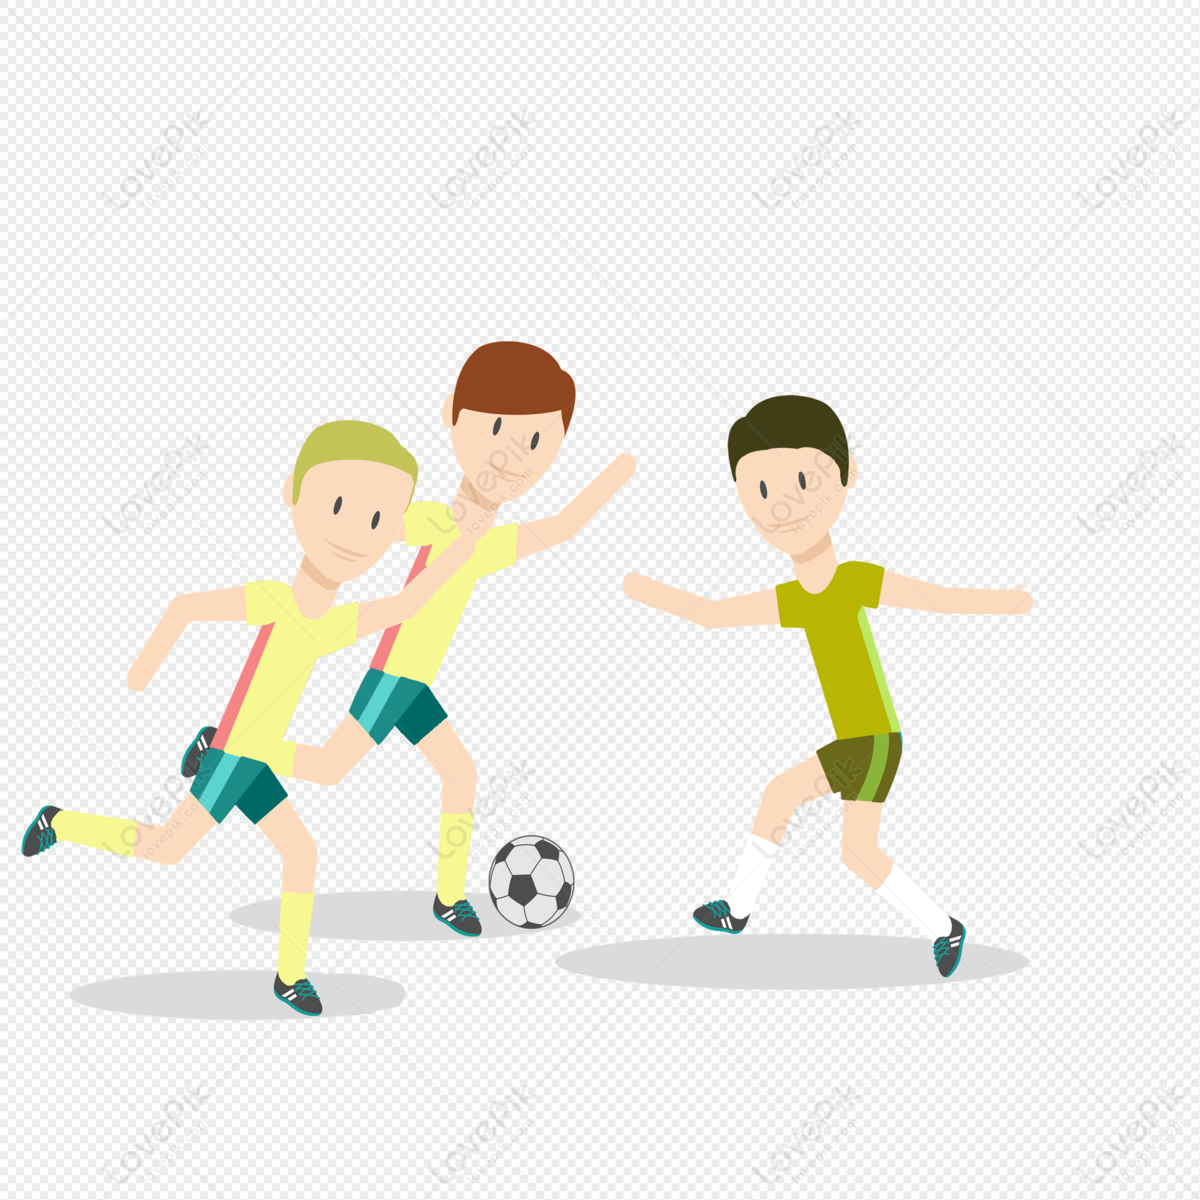 Football Match PNG Hd Transparent Image And Clipart Image For Free Download  - Lovepik | 401406374